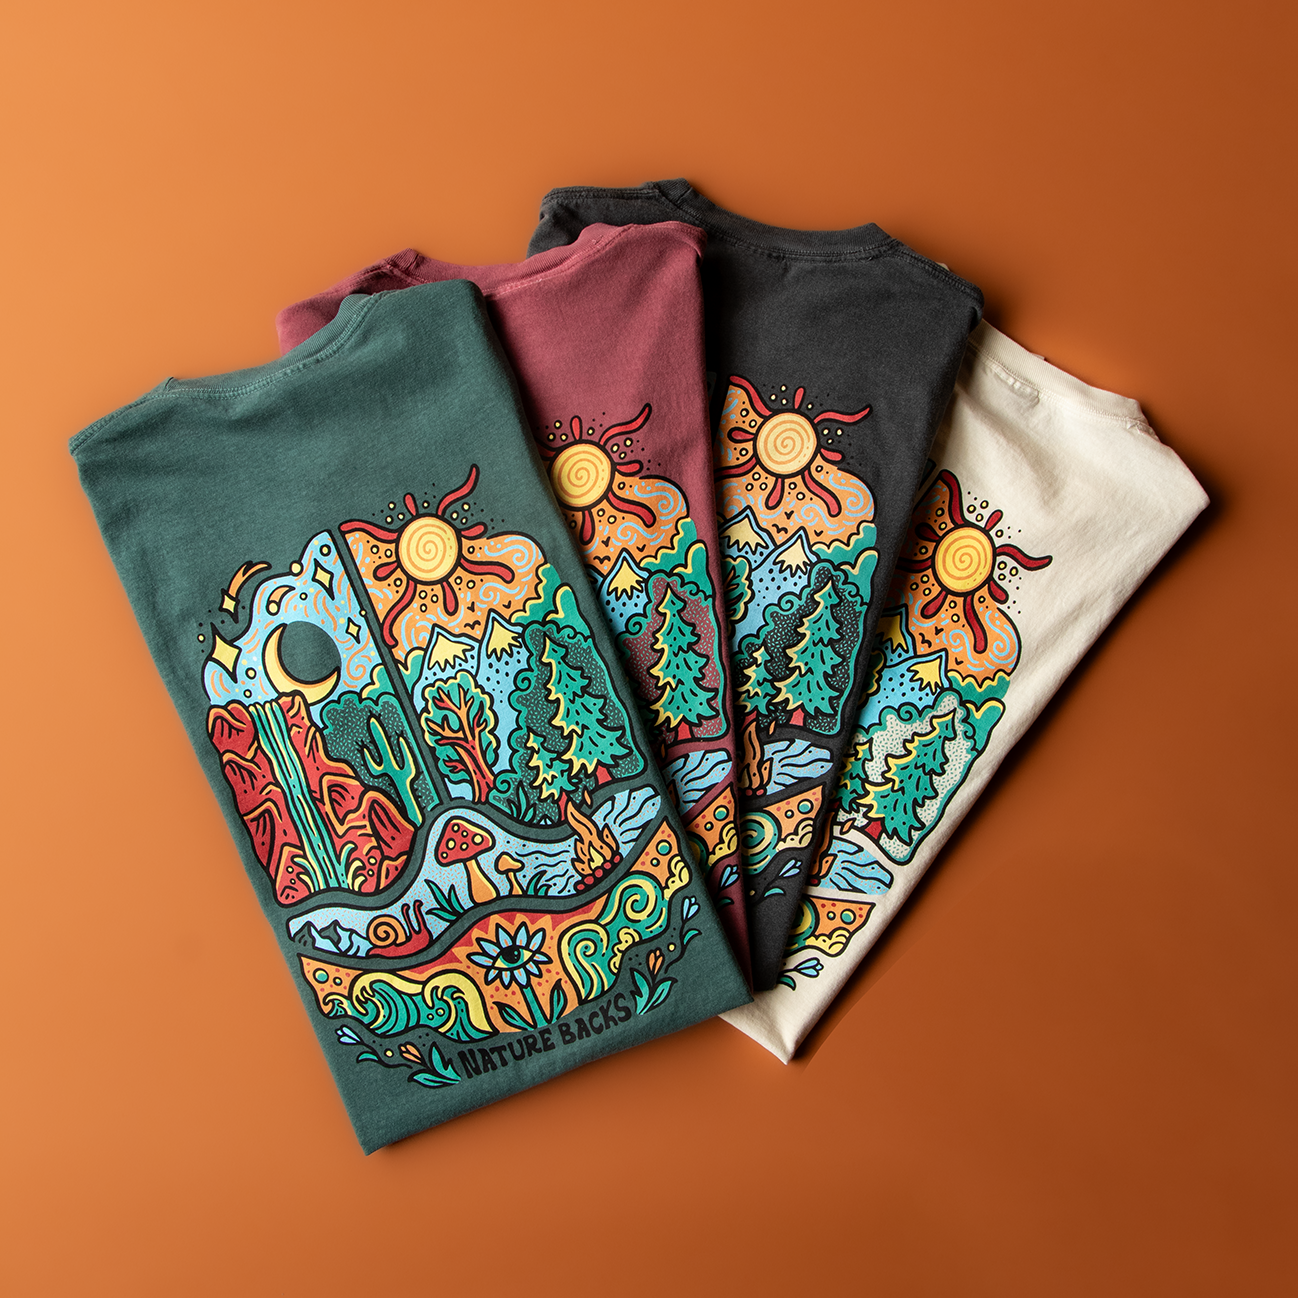 Nature Backs Comfort Colors Enchanted Charcoal Short Sleeve T-Shirt | Nature-Inspired Design on Ultra-Soft Fabric Flatlay